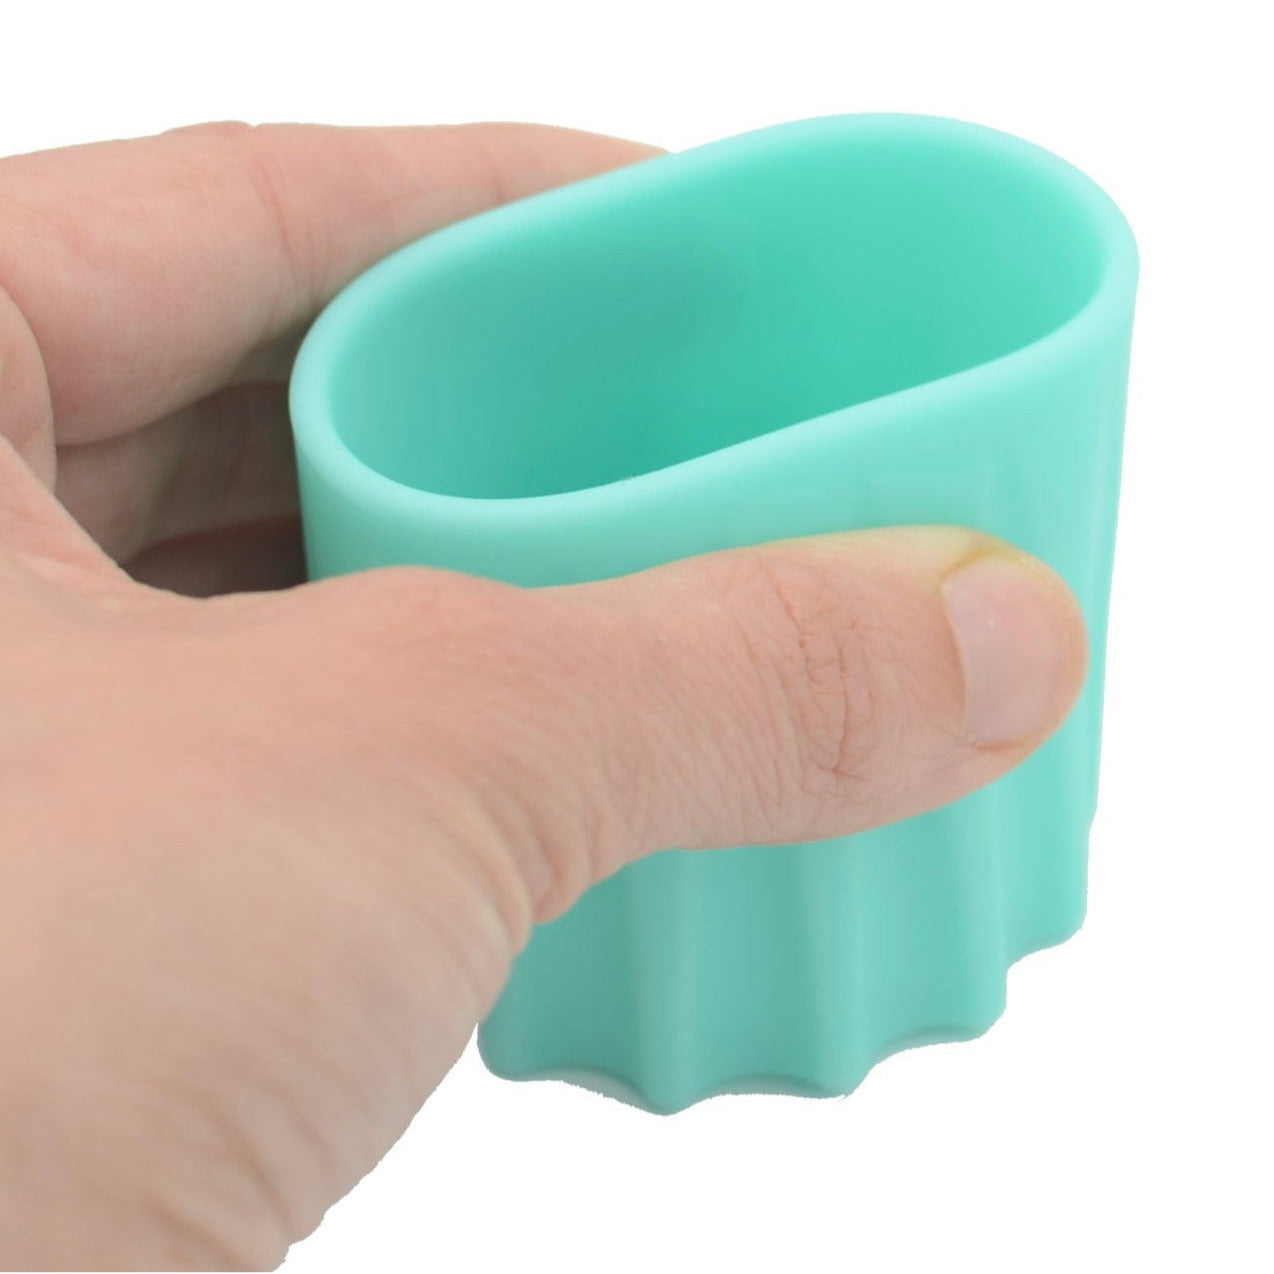 3 oz Flexible Silicone Baby and Toddler Cup Eztotz